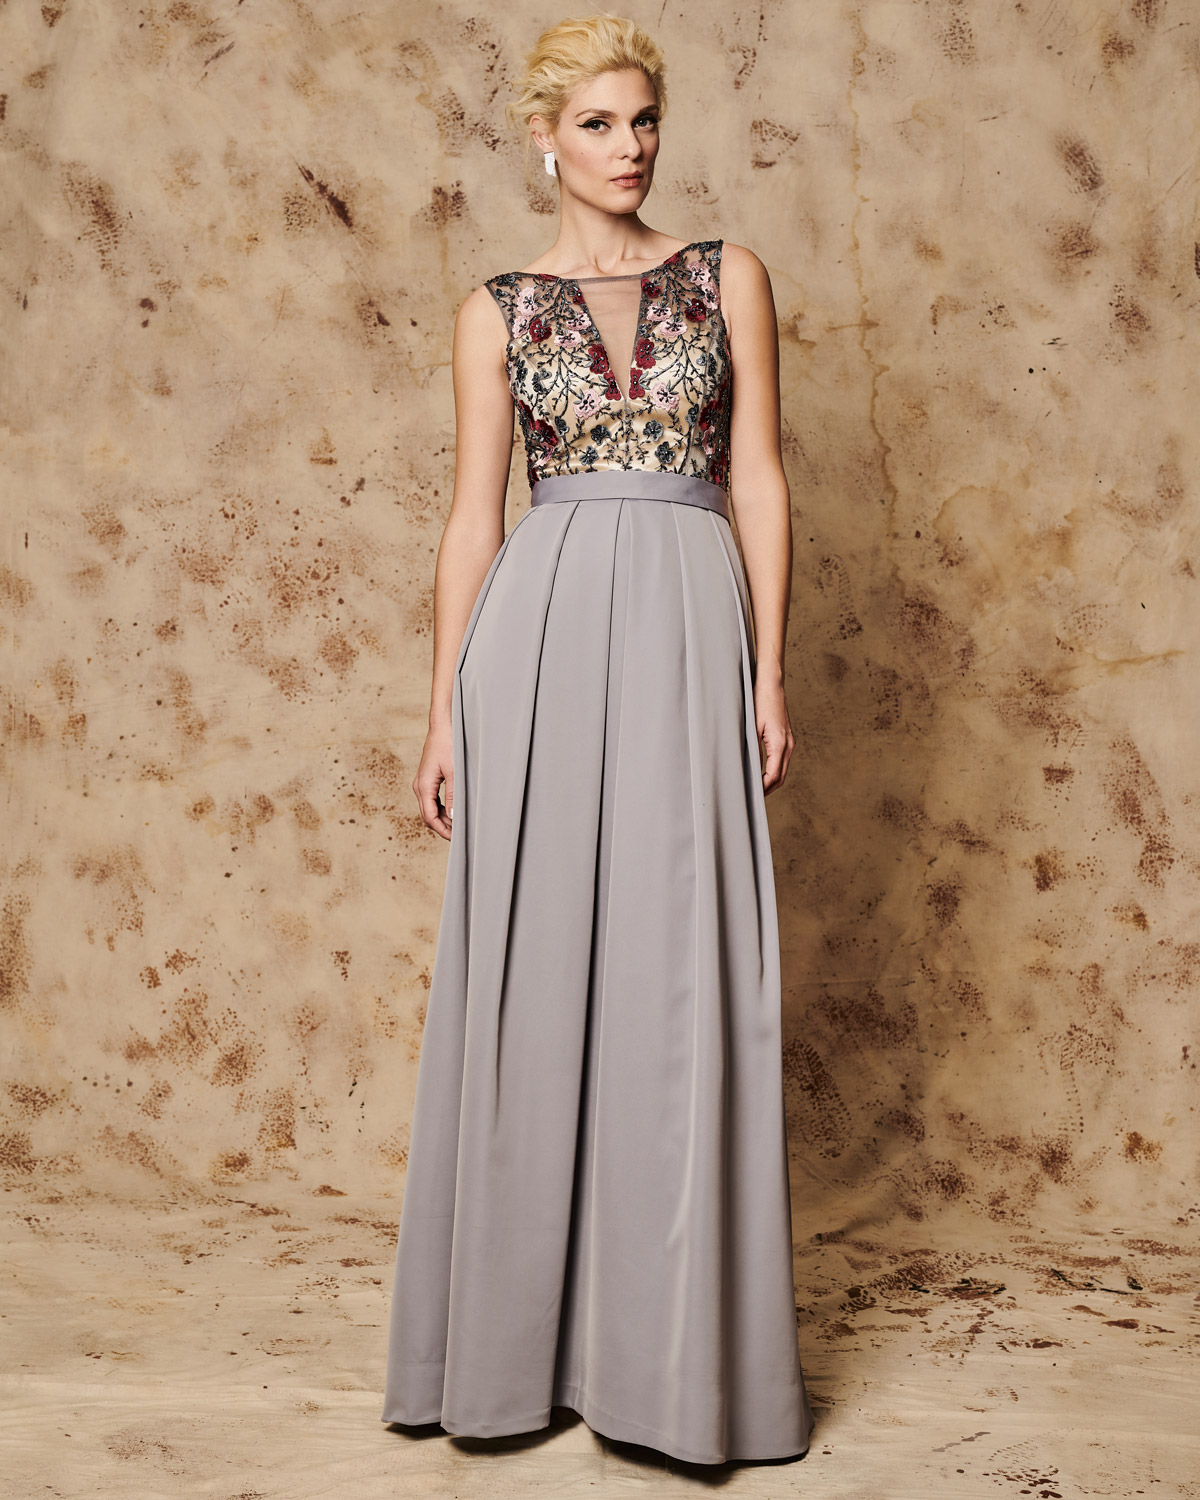 Classic Dresses / Long evening dress with applique flowers and beading